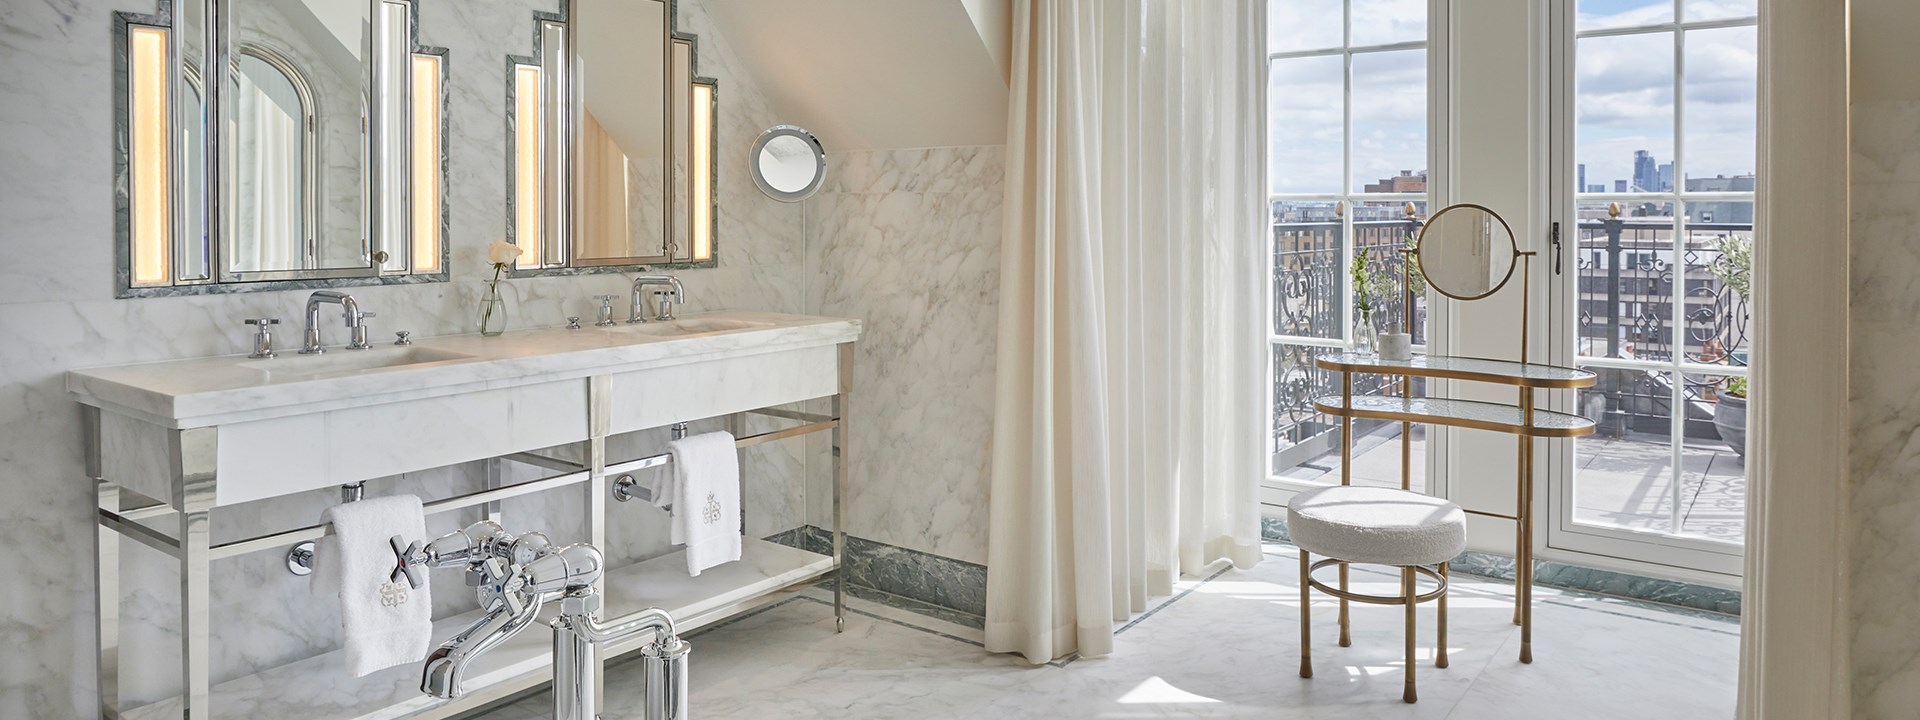 The Mews Pavilion at Claridge's -bathroom view with floor to ceiling marble with two bath sinks and view of the roofs of London.